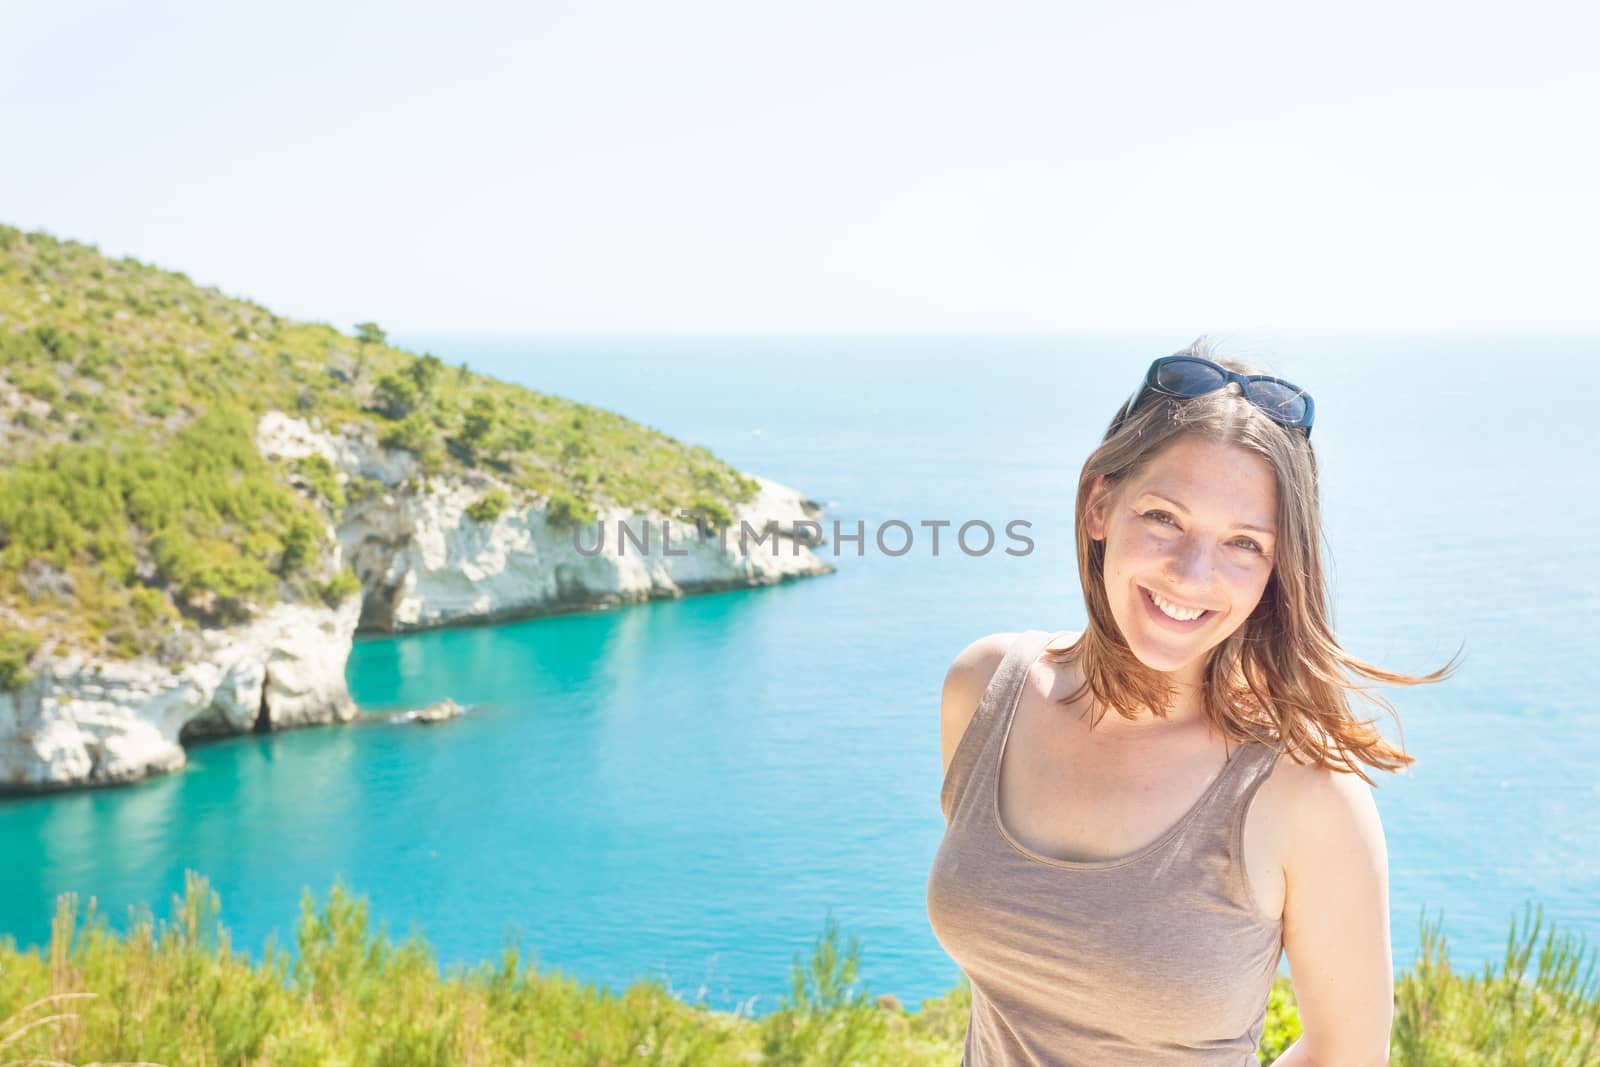 Apulia, Italy - Portrait of a smiling woman at Grotta della Camp by tagstiles.com